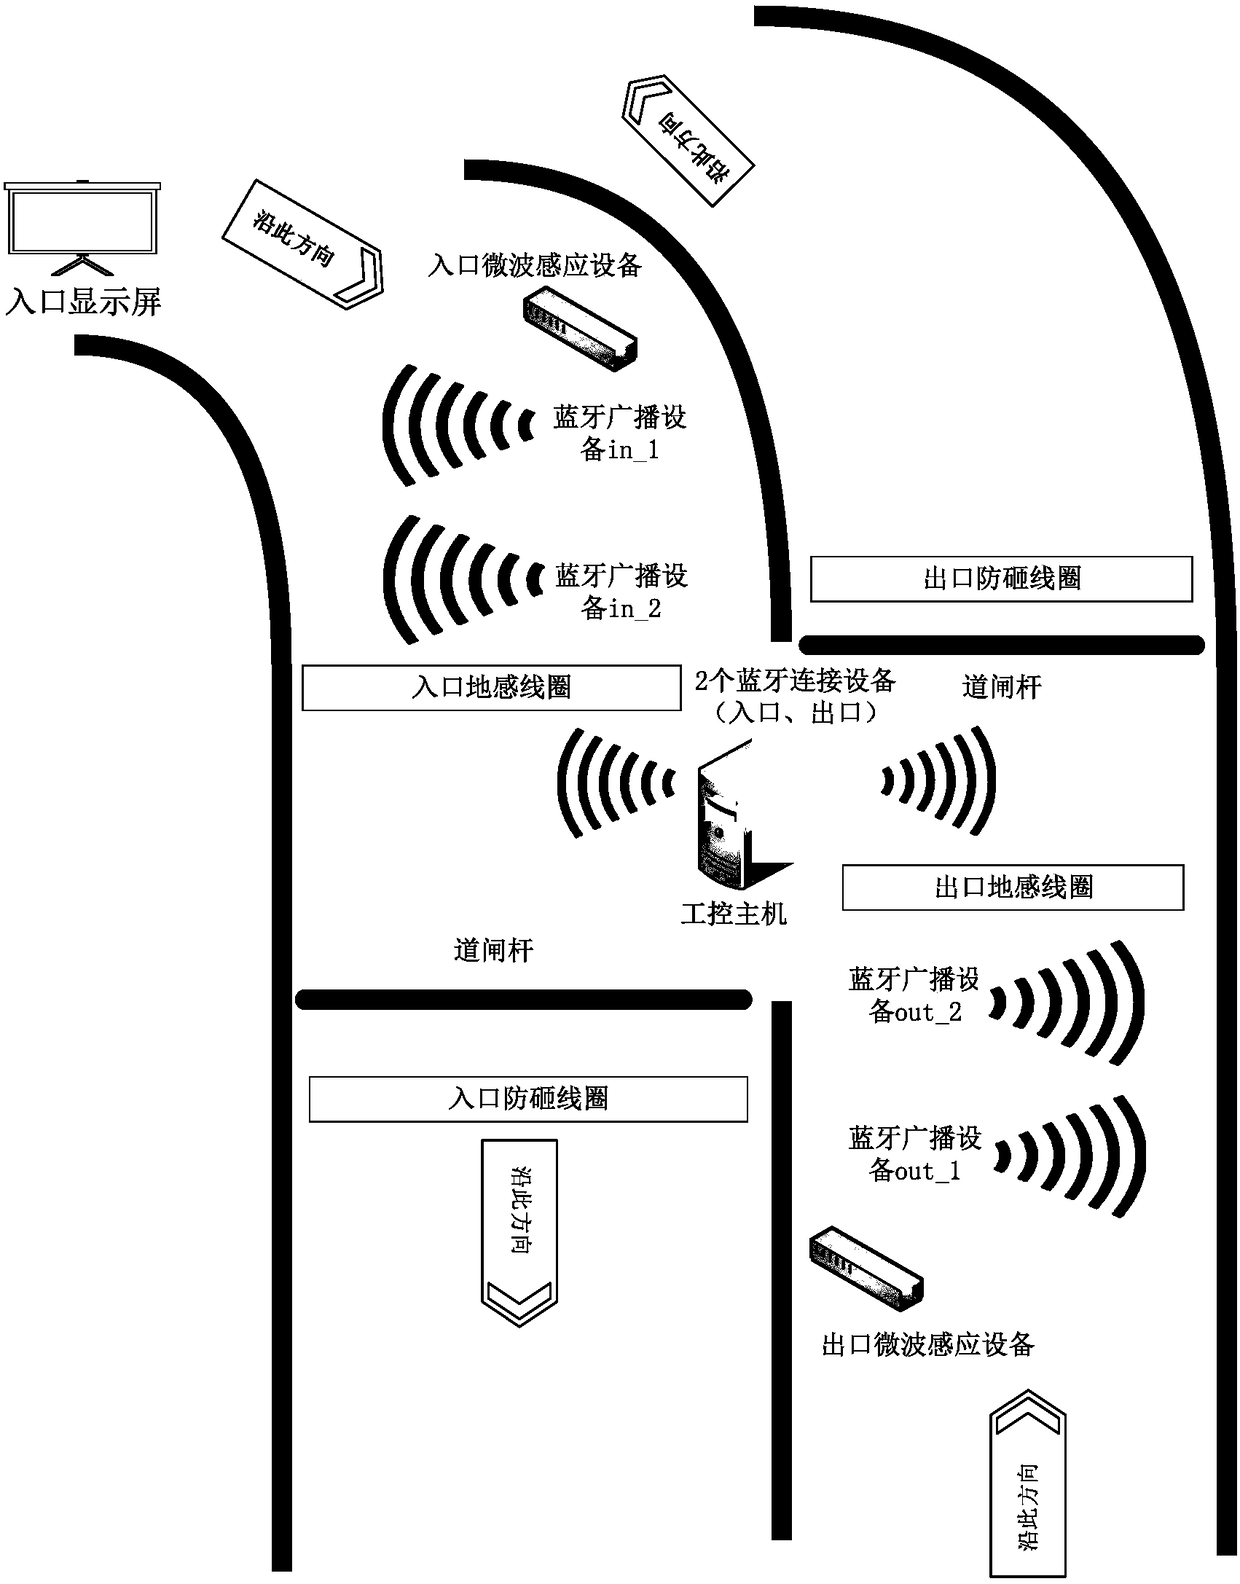 A Bluetooth-based parking lot entry and exit control method and system